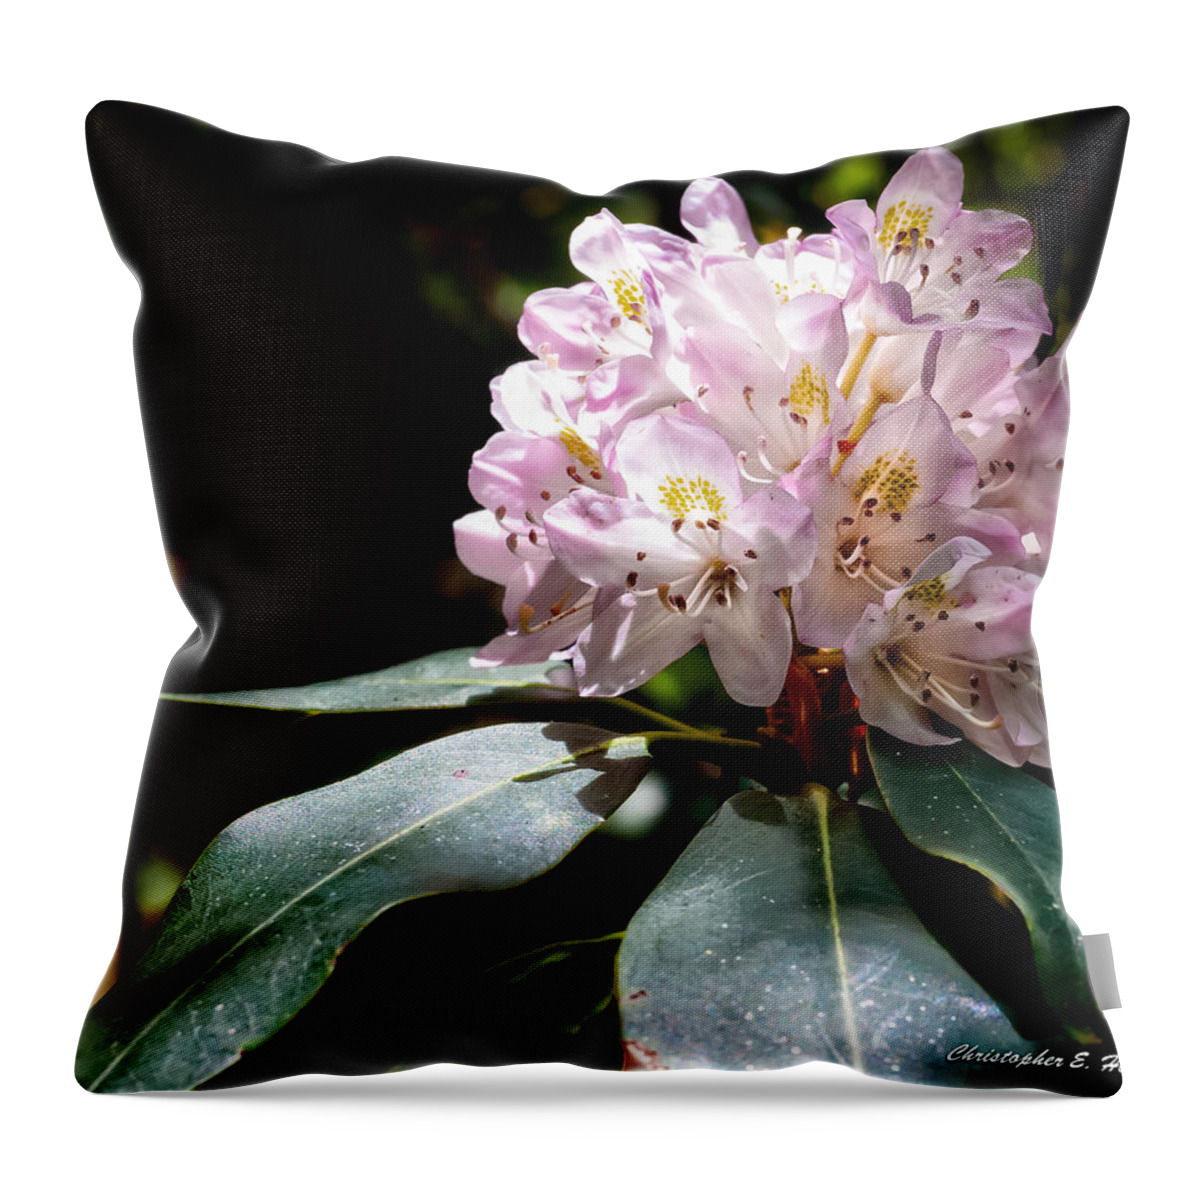 Christopher Holmes Photography Throw Pillow featuring the photograph 20120621-dsc05834 by Christopher Holmes